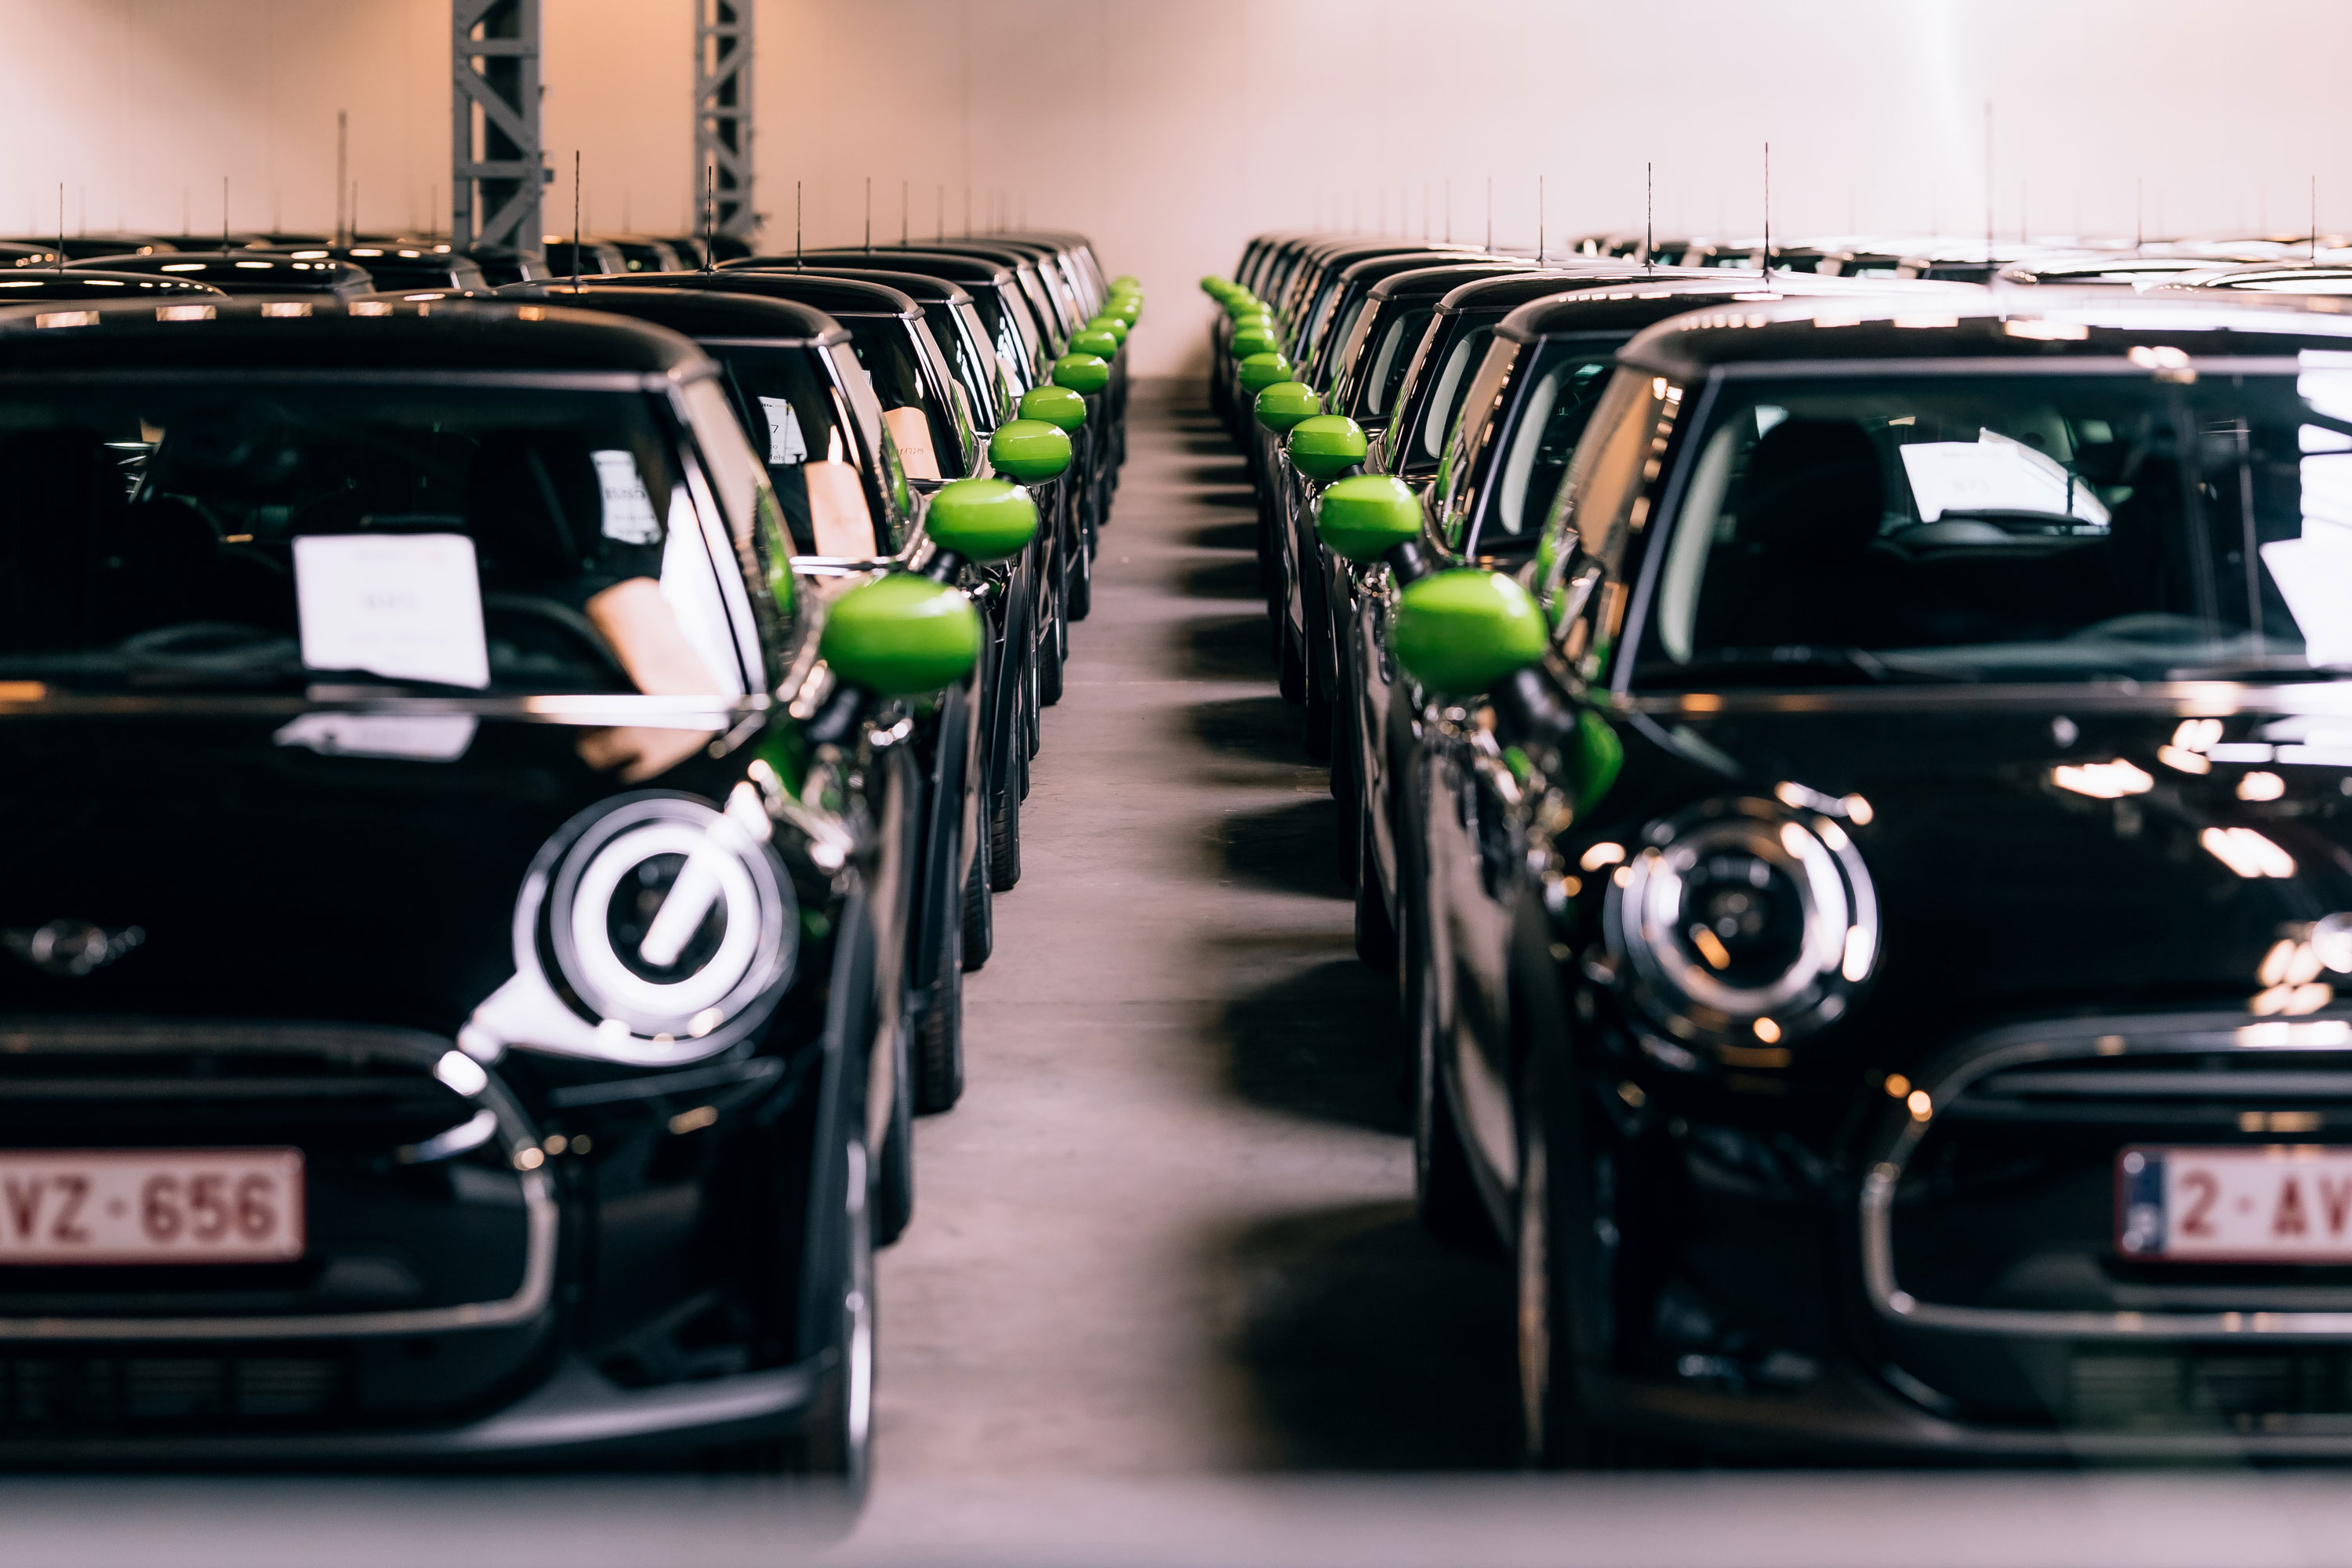 One in four Deloitte employees in Belgium chooses a MINI Electric